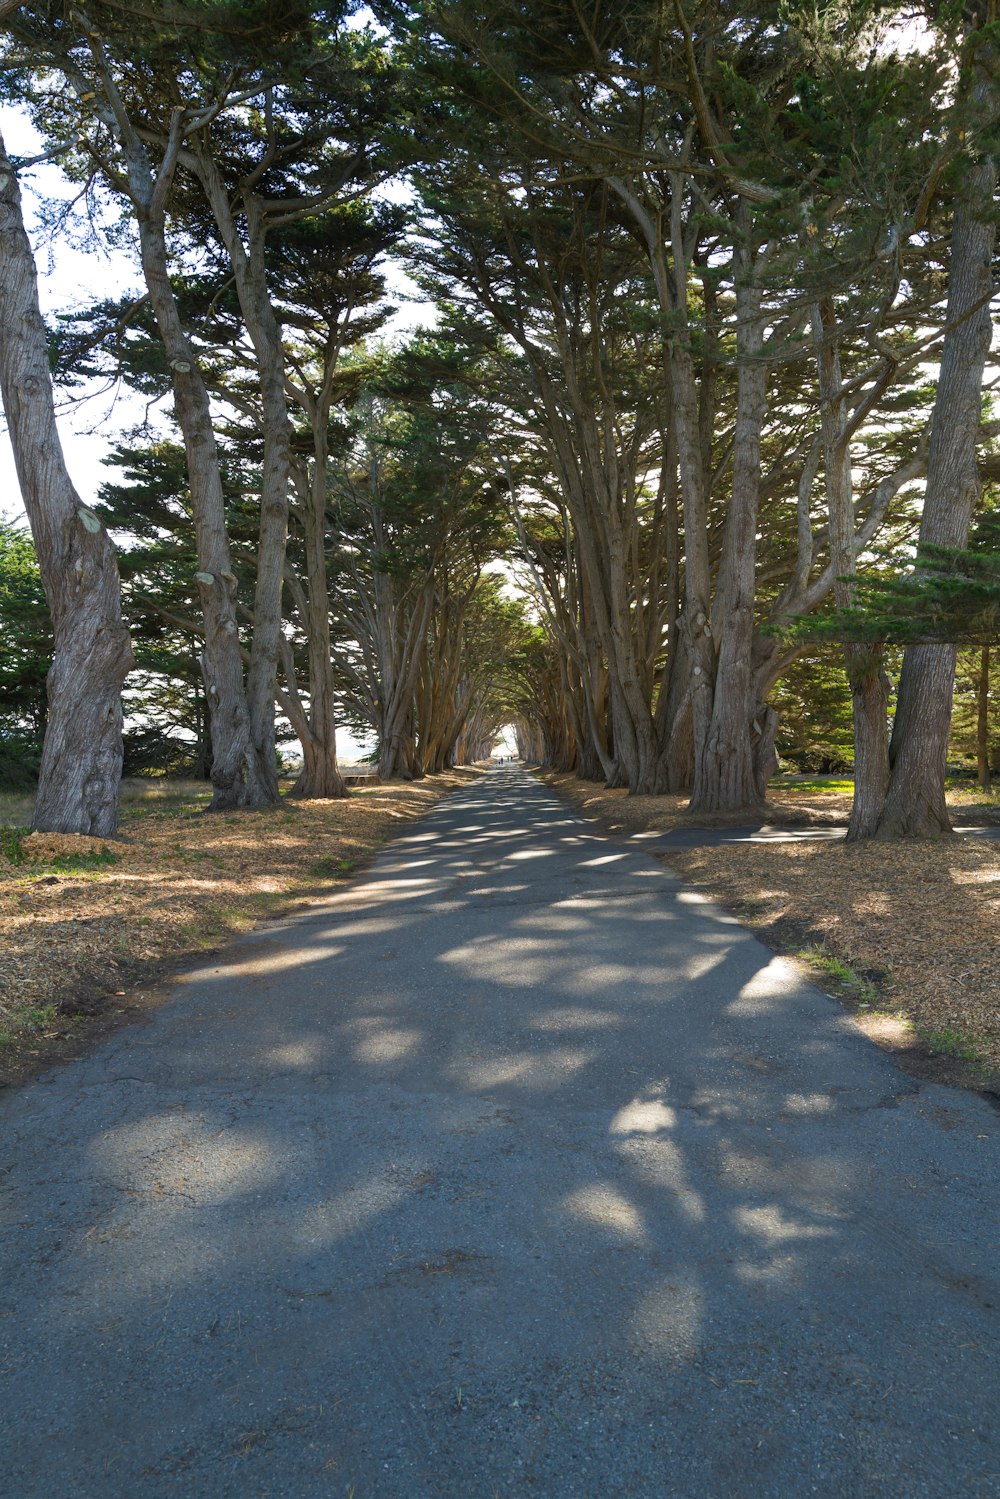 a paved road with trees on both sides